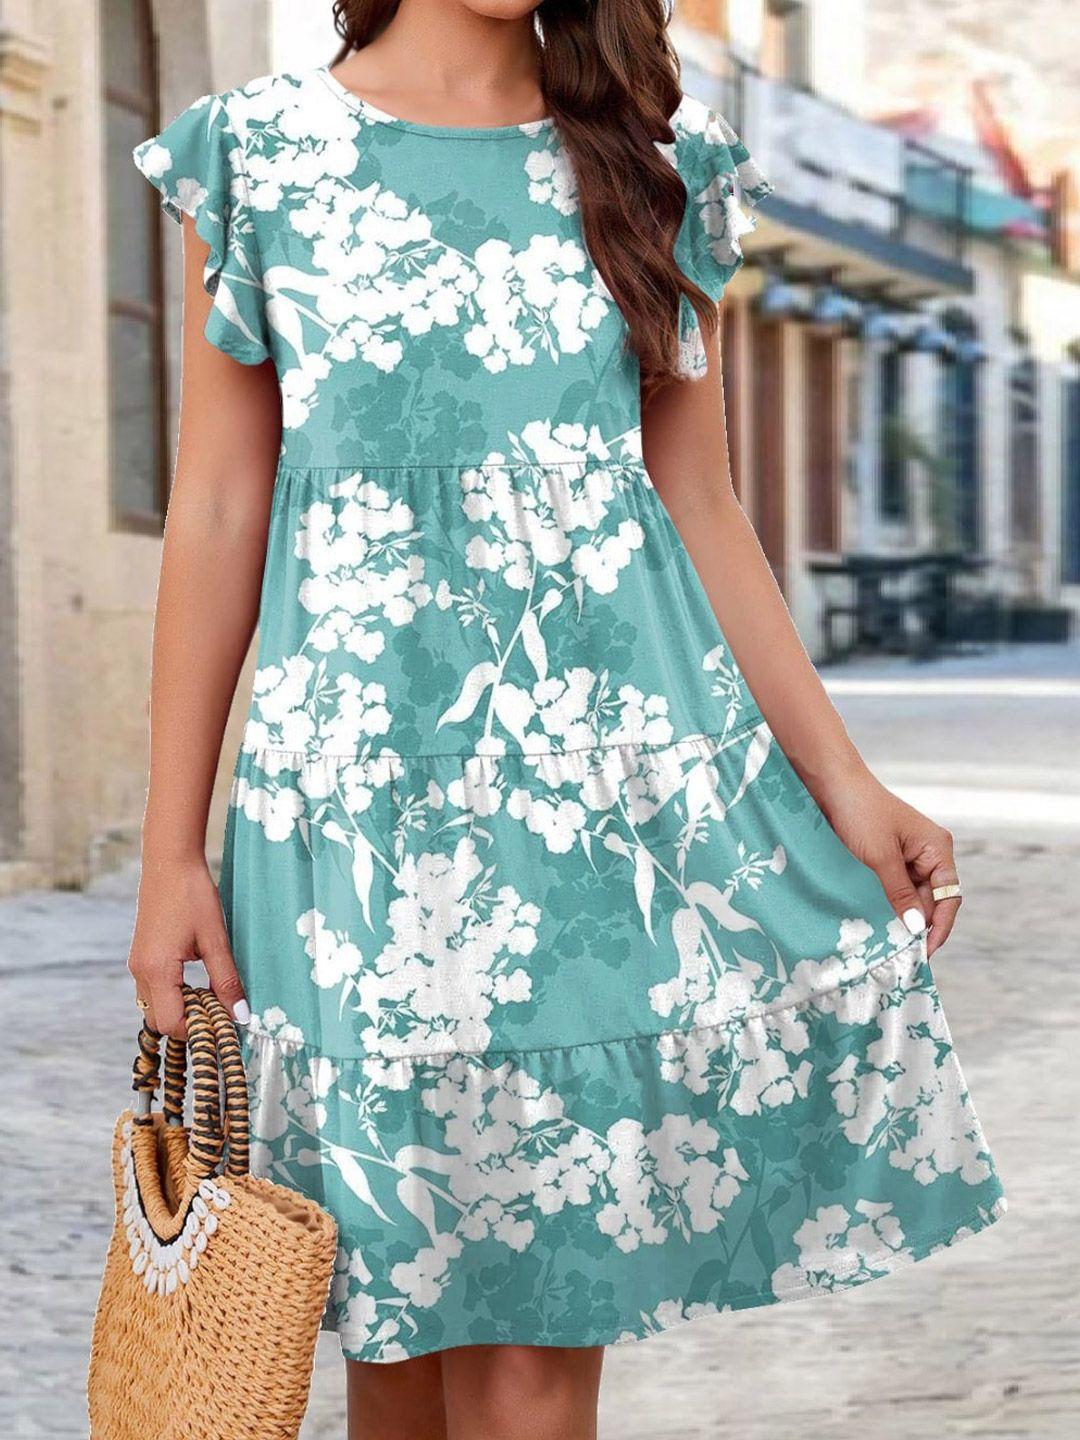 stylecast x kpop floral printed flutter sleeves gathered detailed fit & flare dress